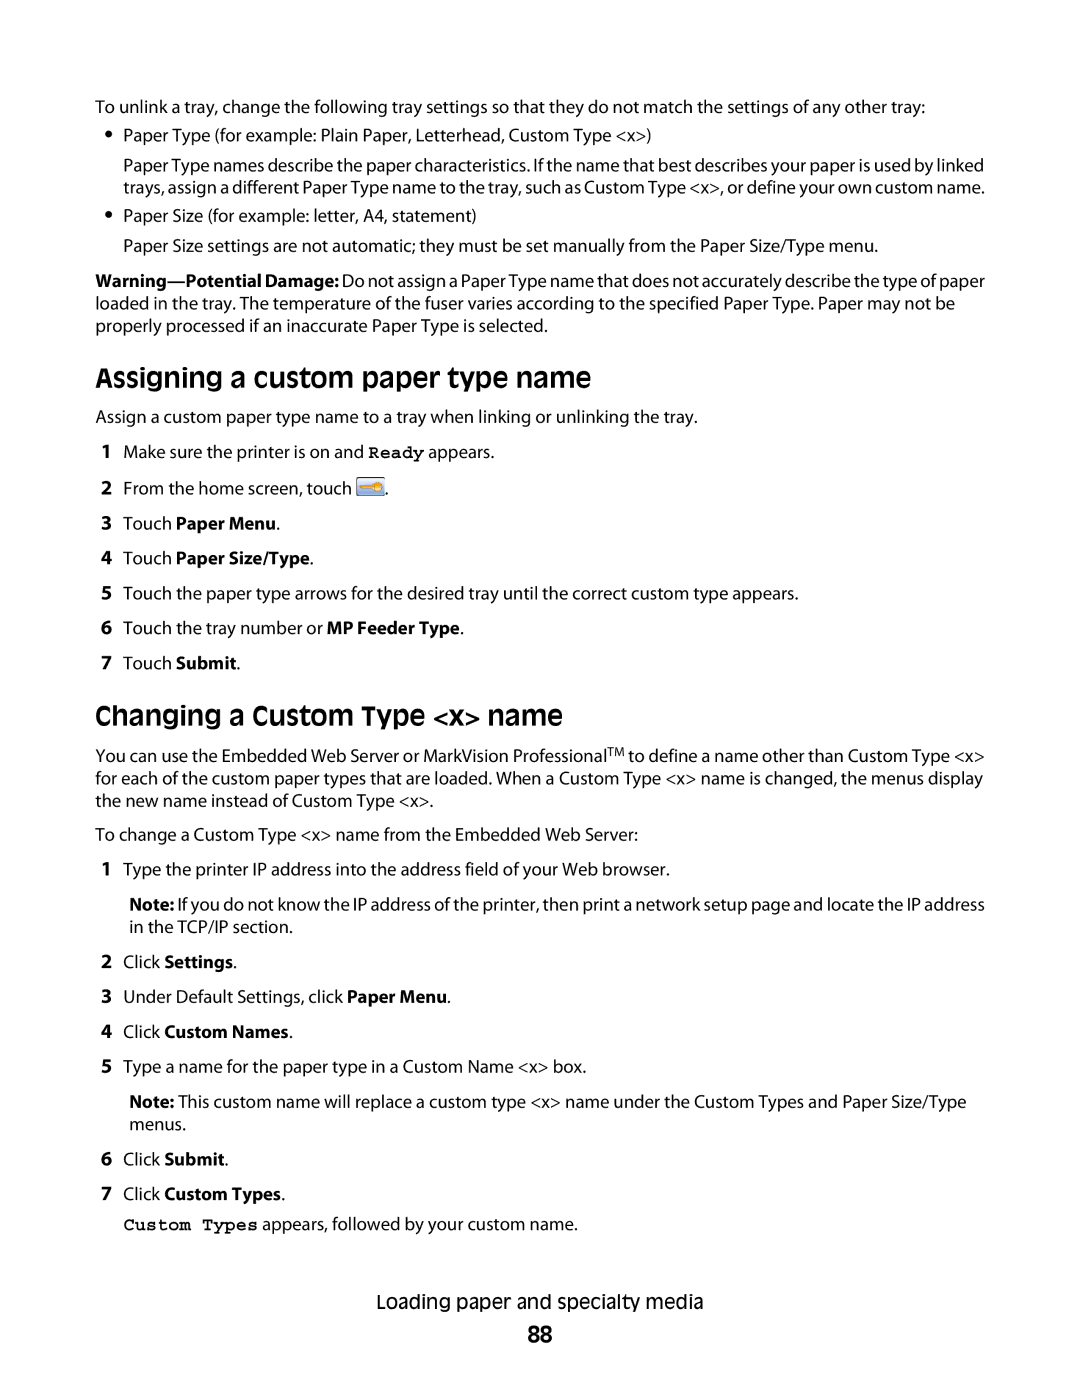 Lexmark X466de, 431 Assigning a custom paper type name, Changing a Custom Type x name, Click Settings, Click Custom Names 